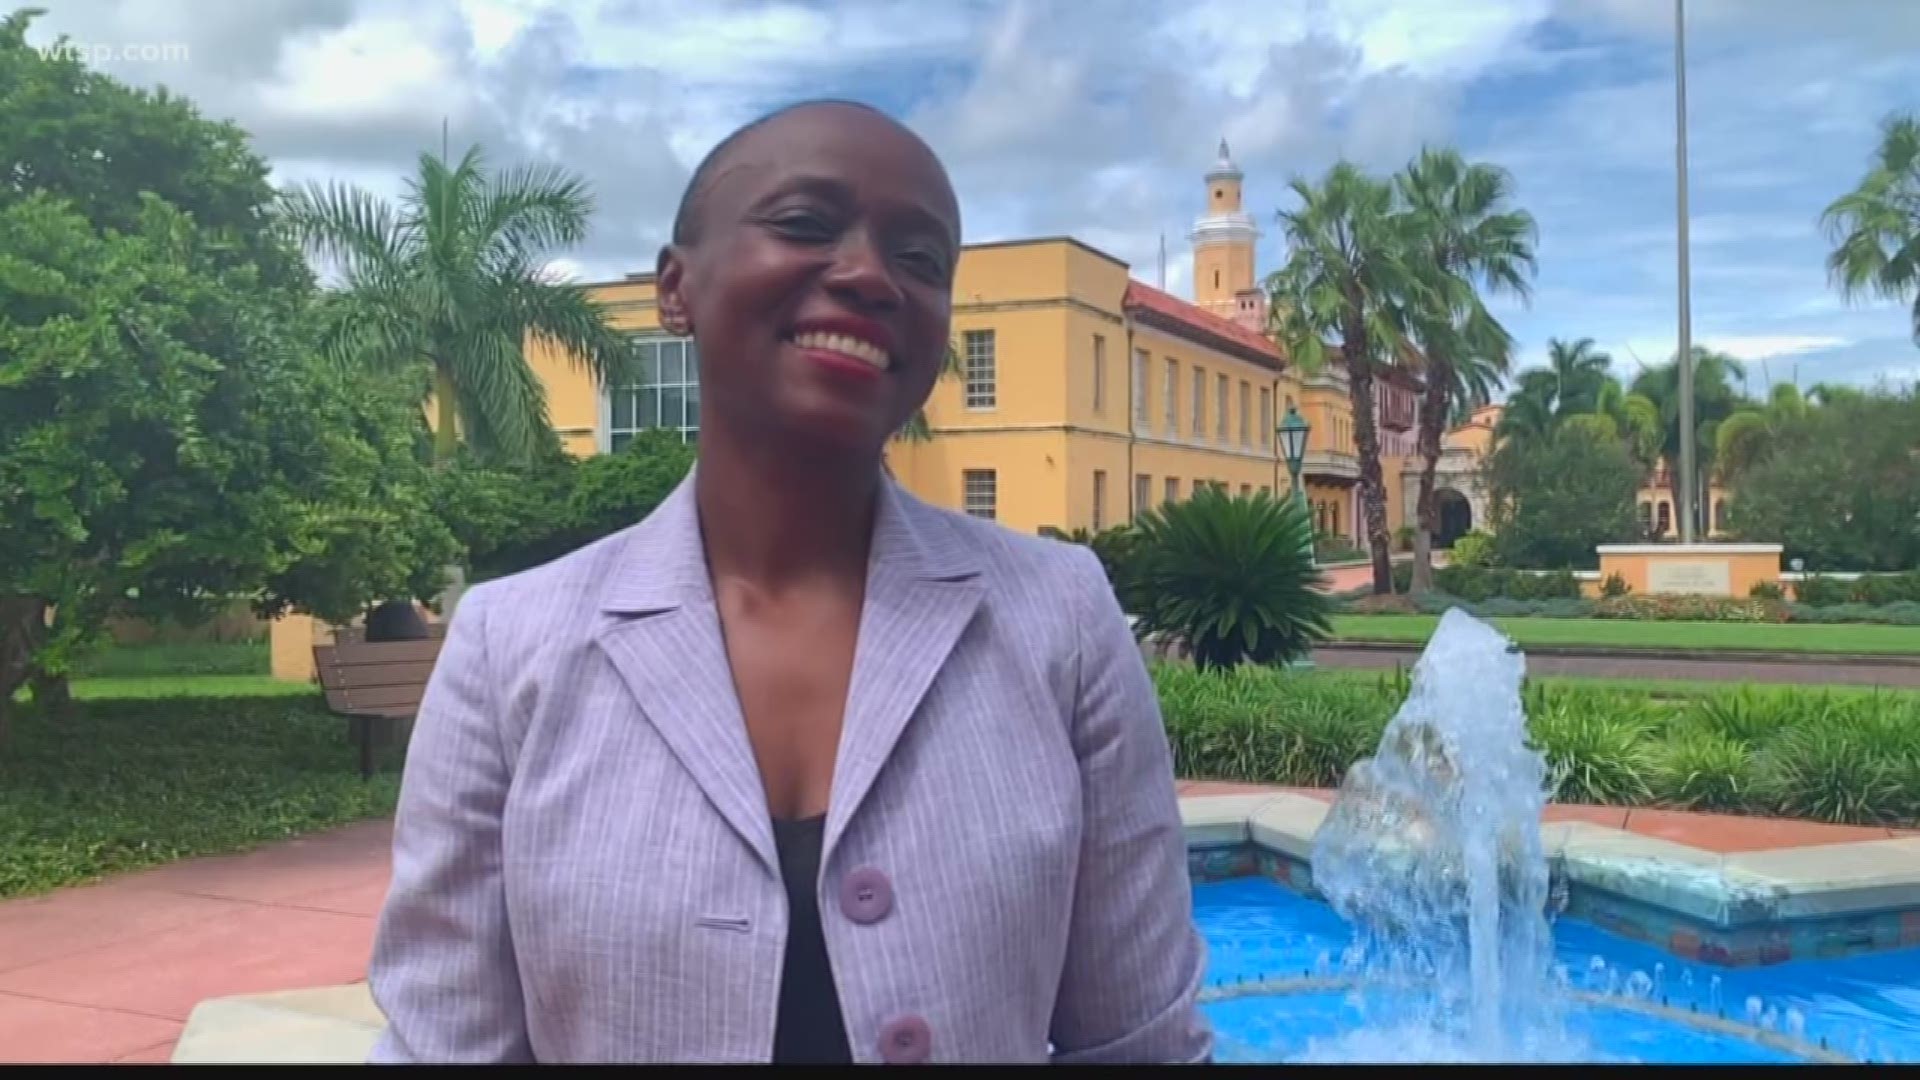 She has made leaps and bounds in her time and did not learn English until she was 15. Michele Alexandre is the first black American to be the dean of Stetson Law School. https://on.wtsp.com/2Z2feak